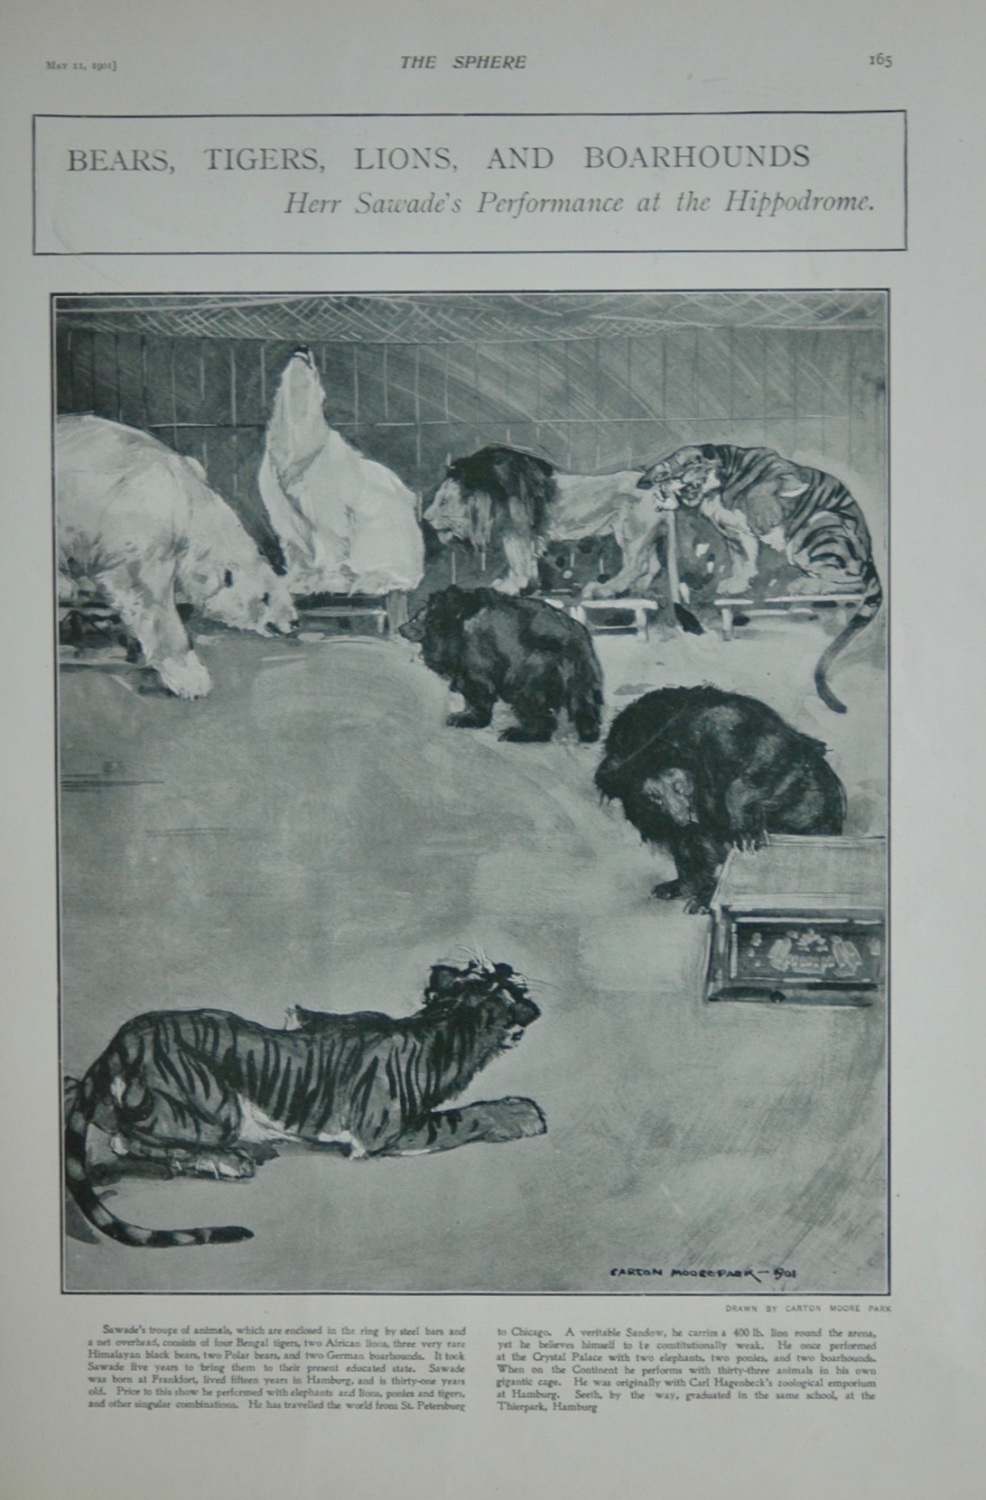 Bears, Tigers, Lions and Boarhounds at the Hippodrome - 1901